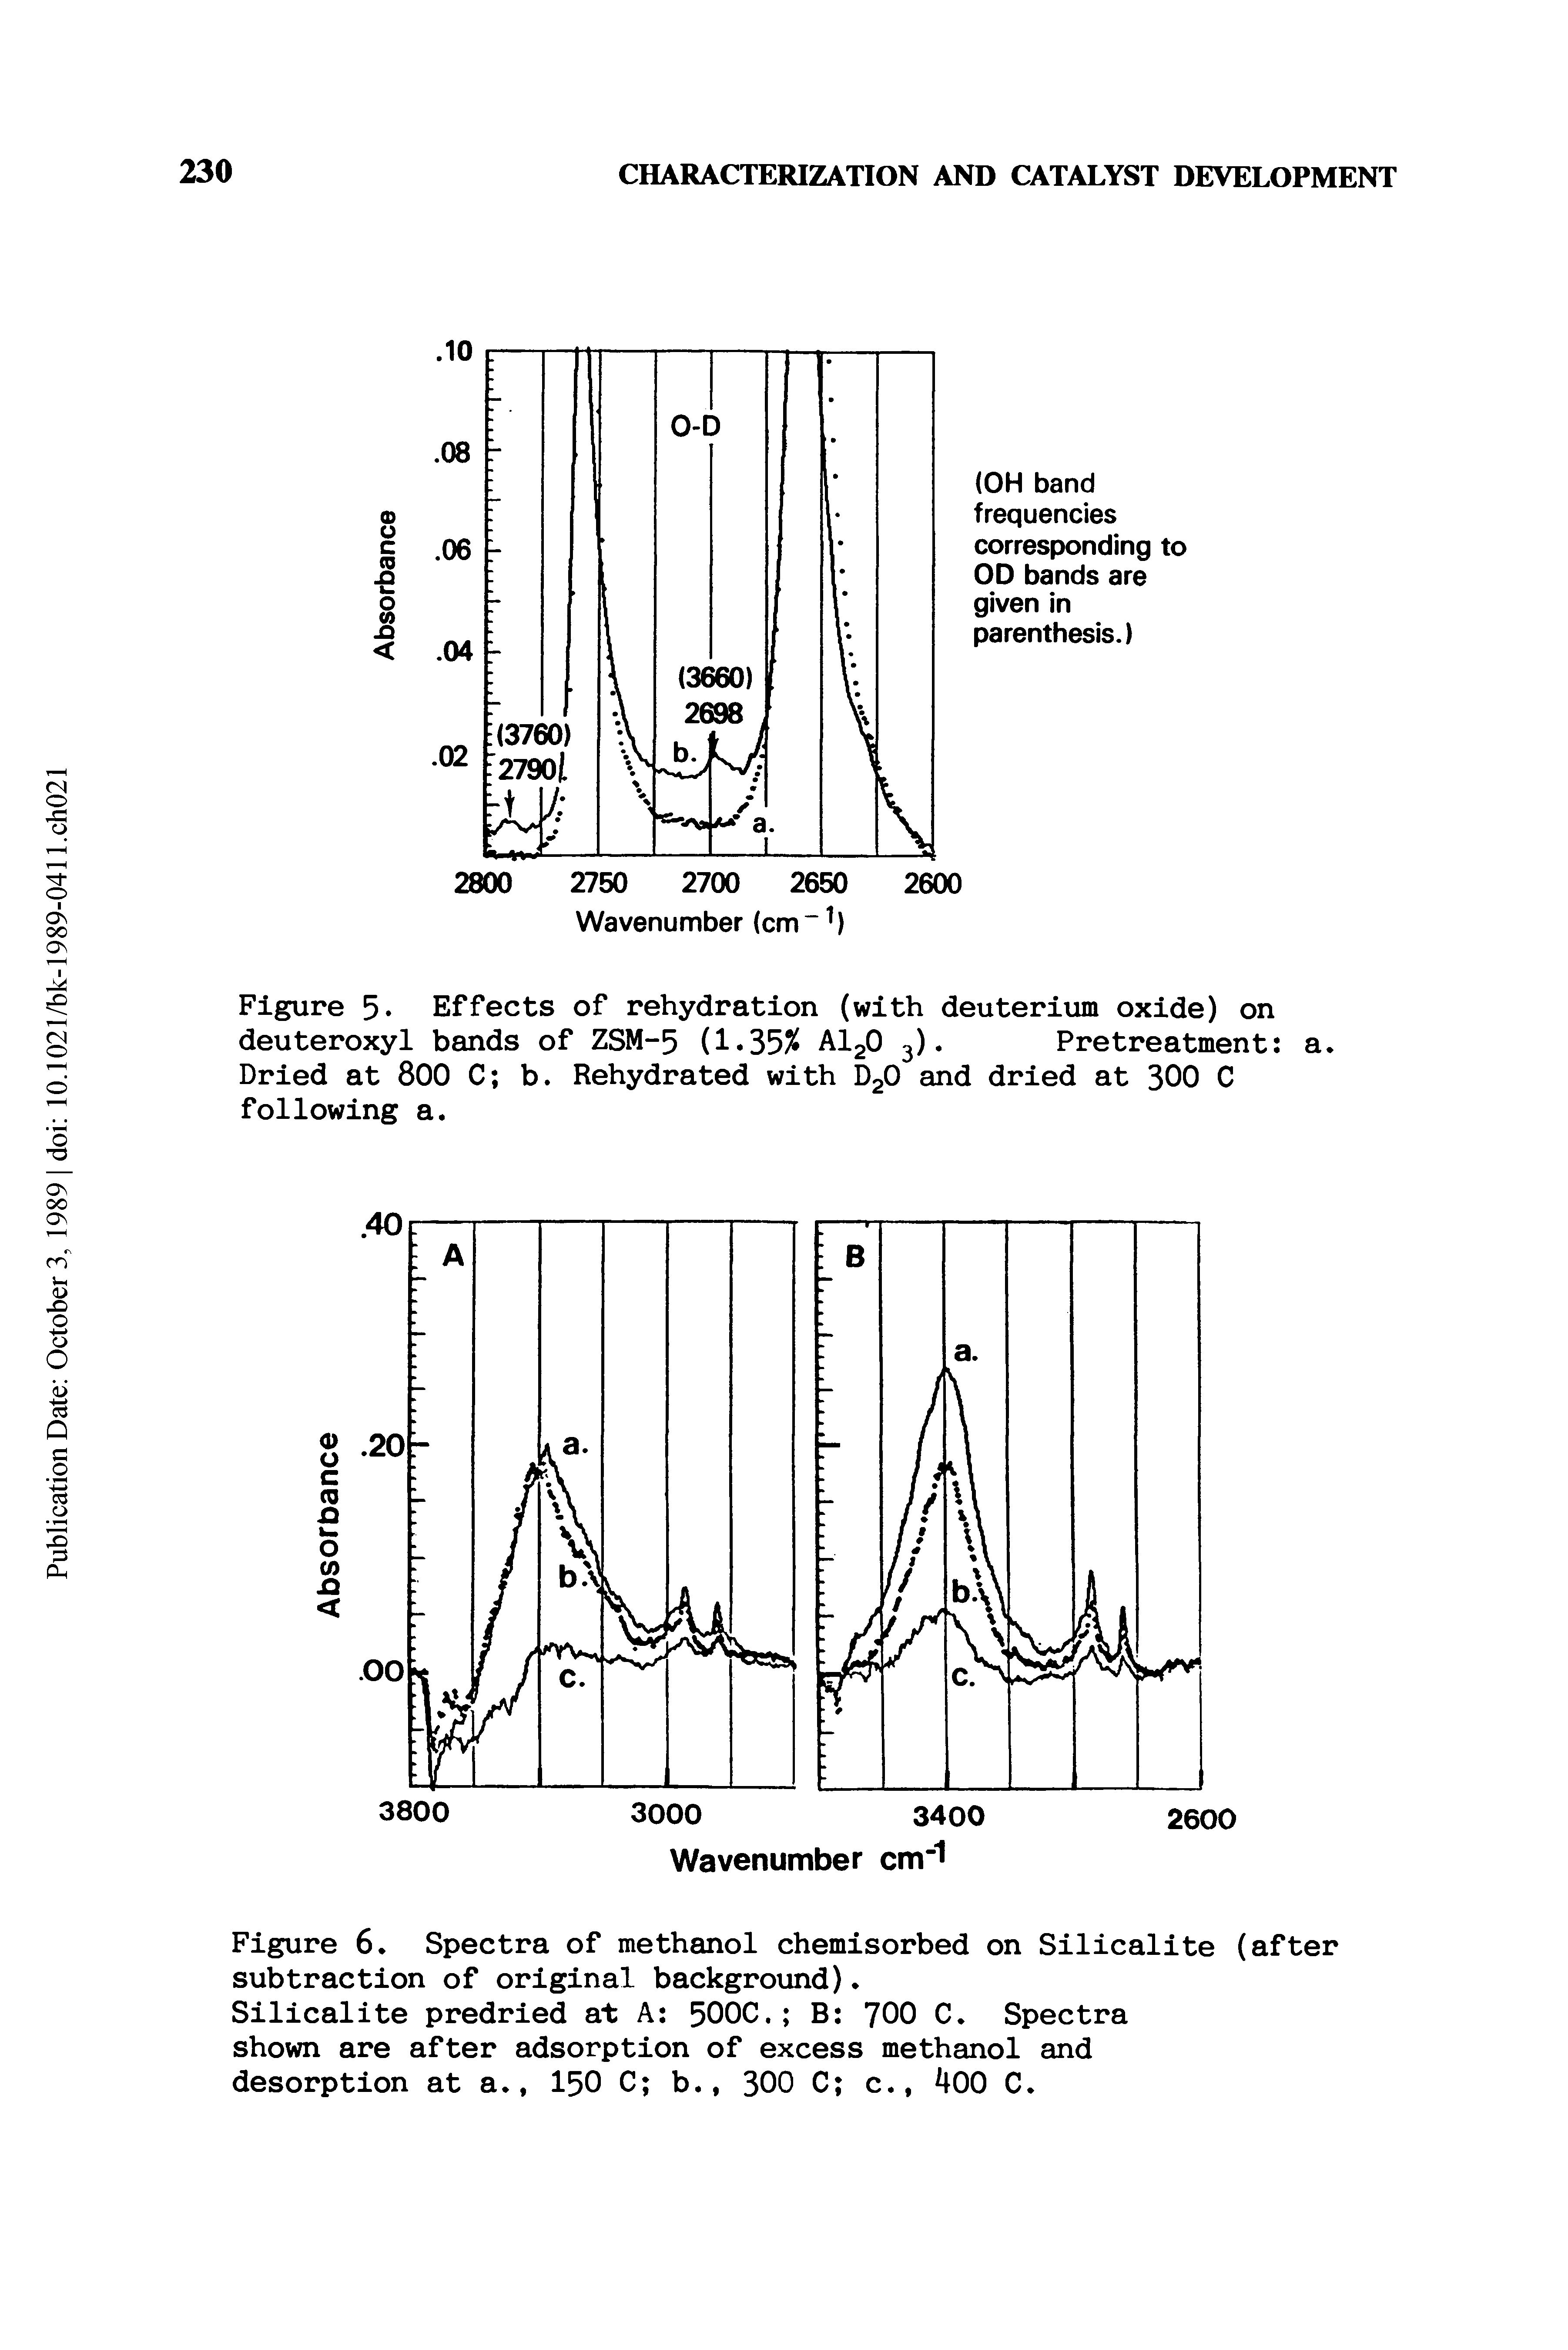 Figure 5 Effects of rehydration (with deuterium oxide) on deuteroxyl bands of ZSM-5 [1.35% A120 3). Pretreatment a.